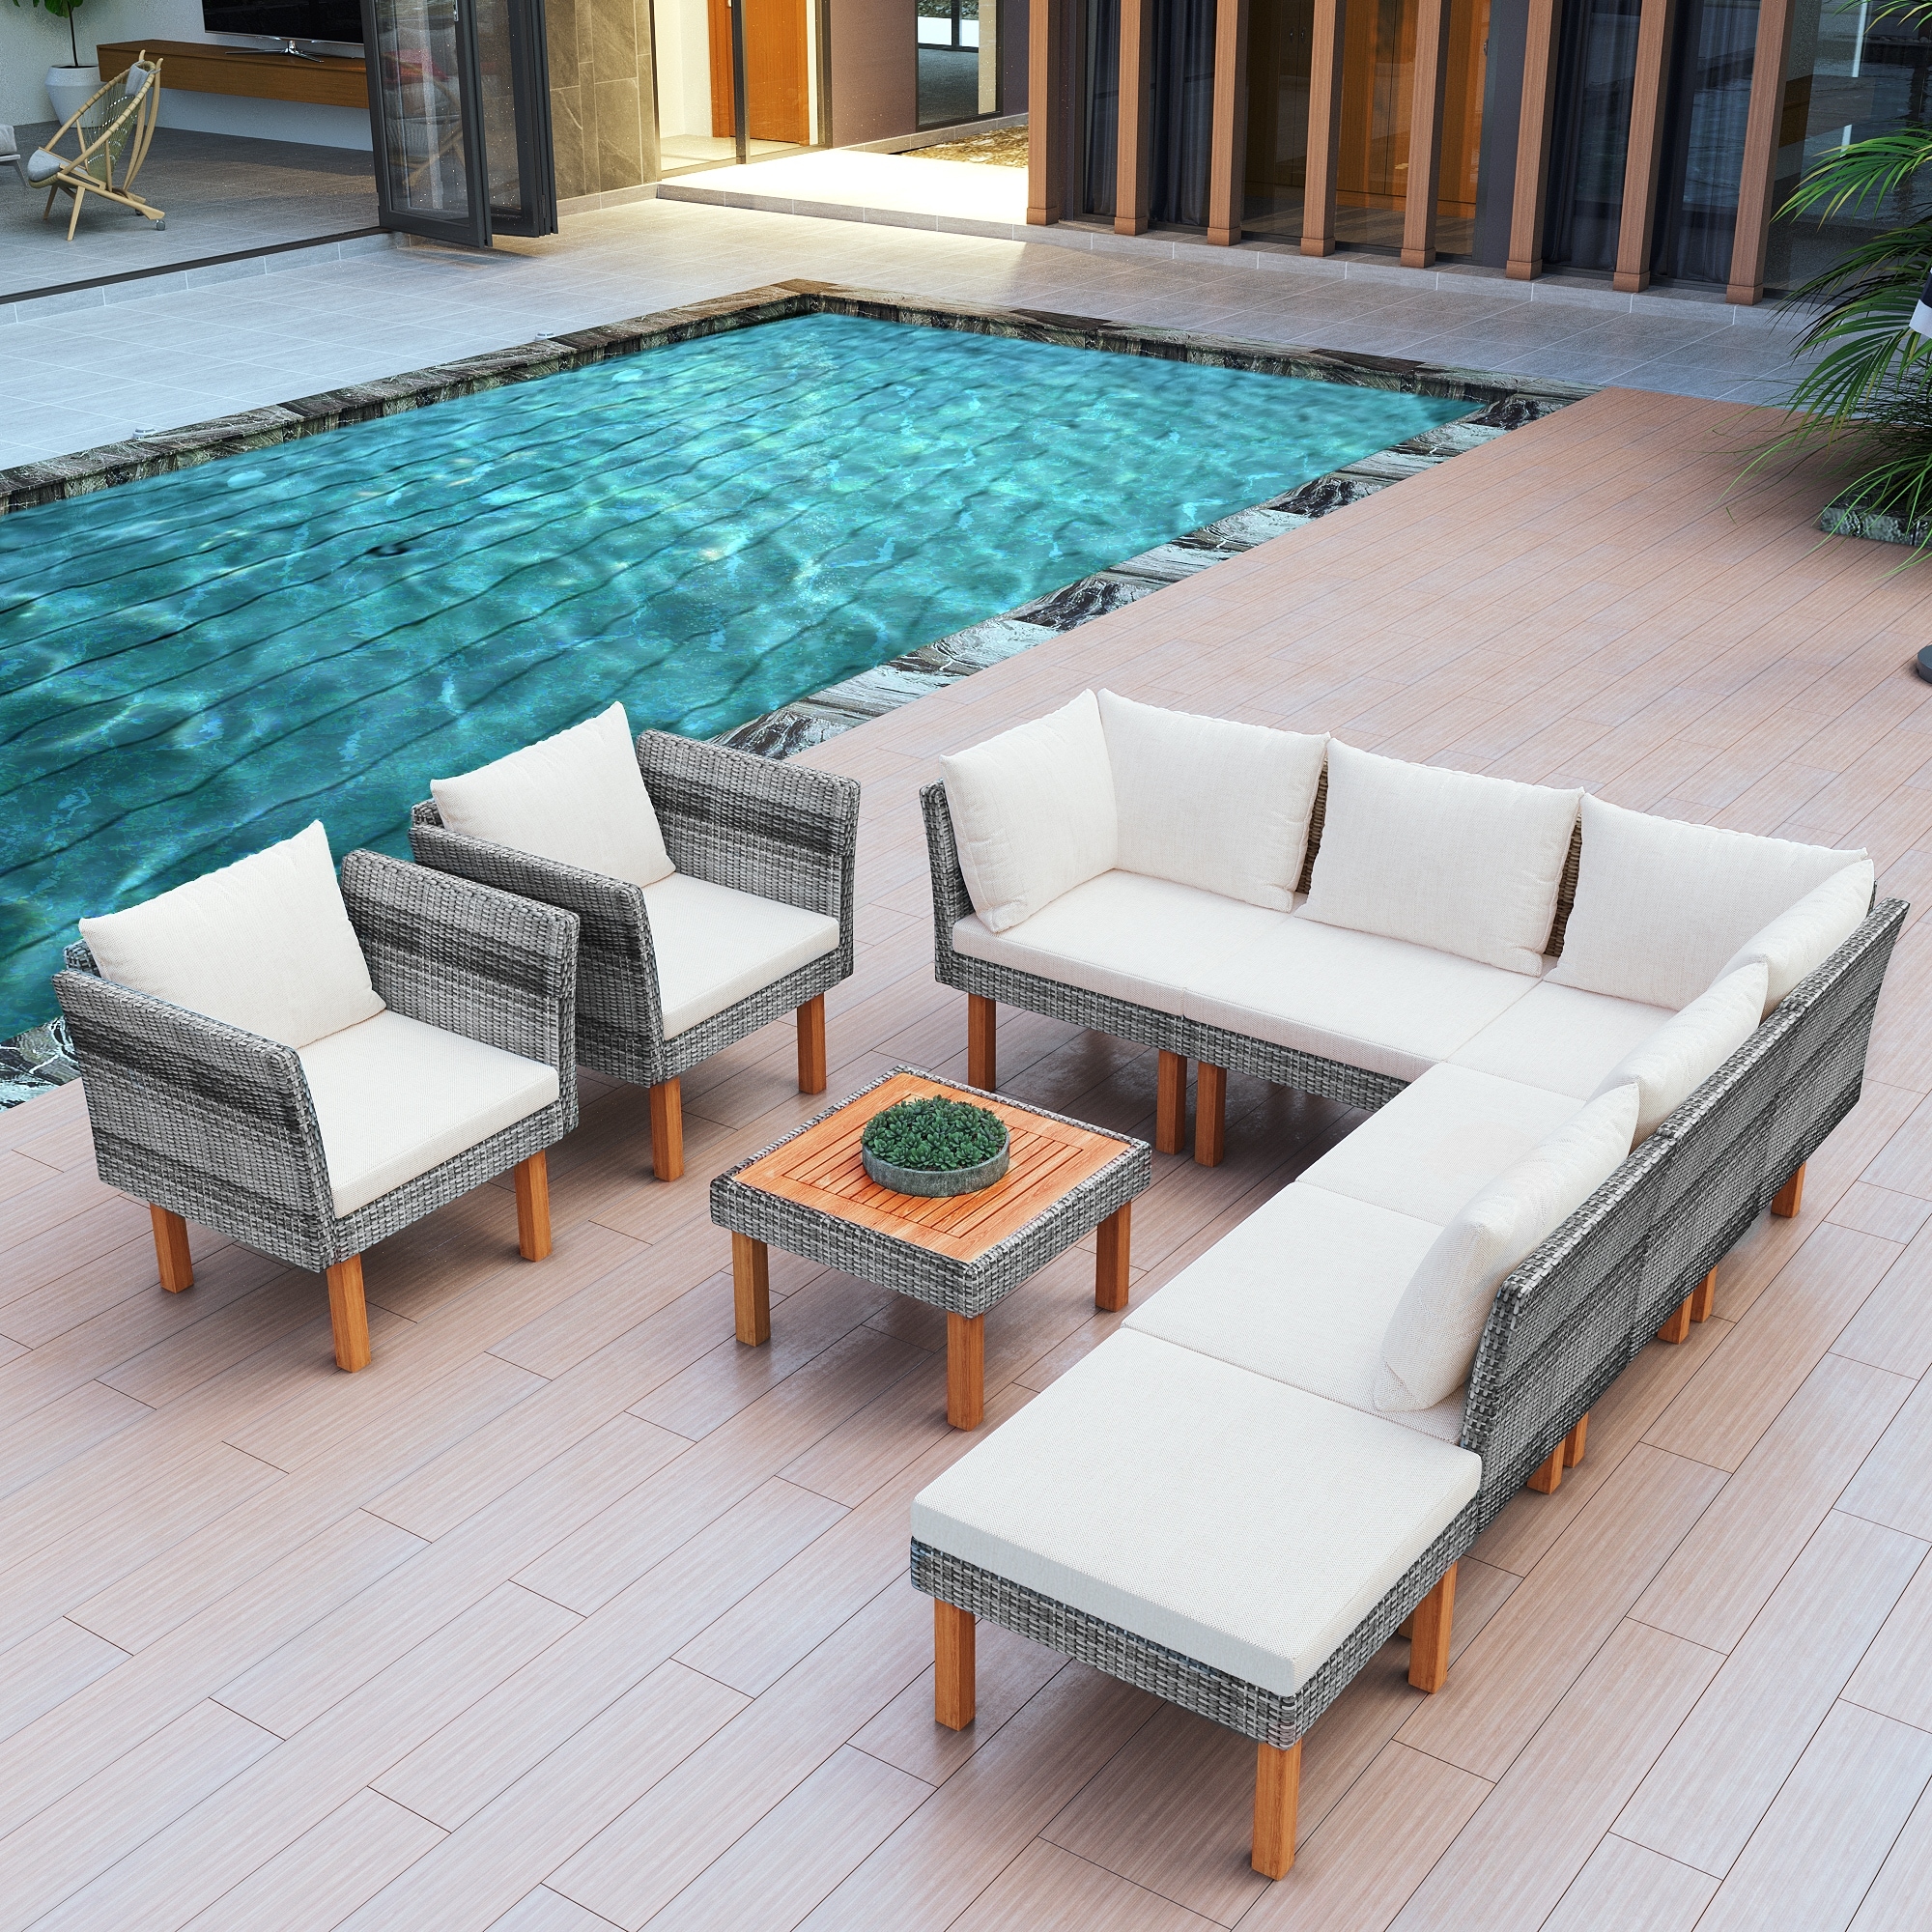 All-weather Wicker Sofa Set With Acacia Wood Table